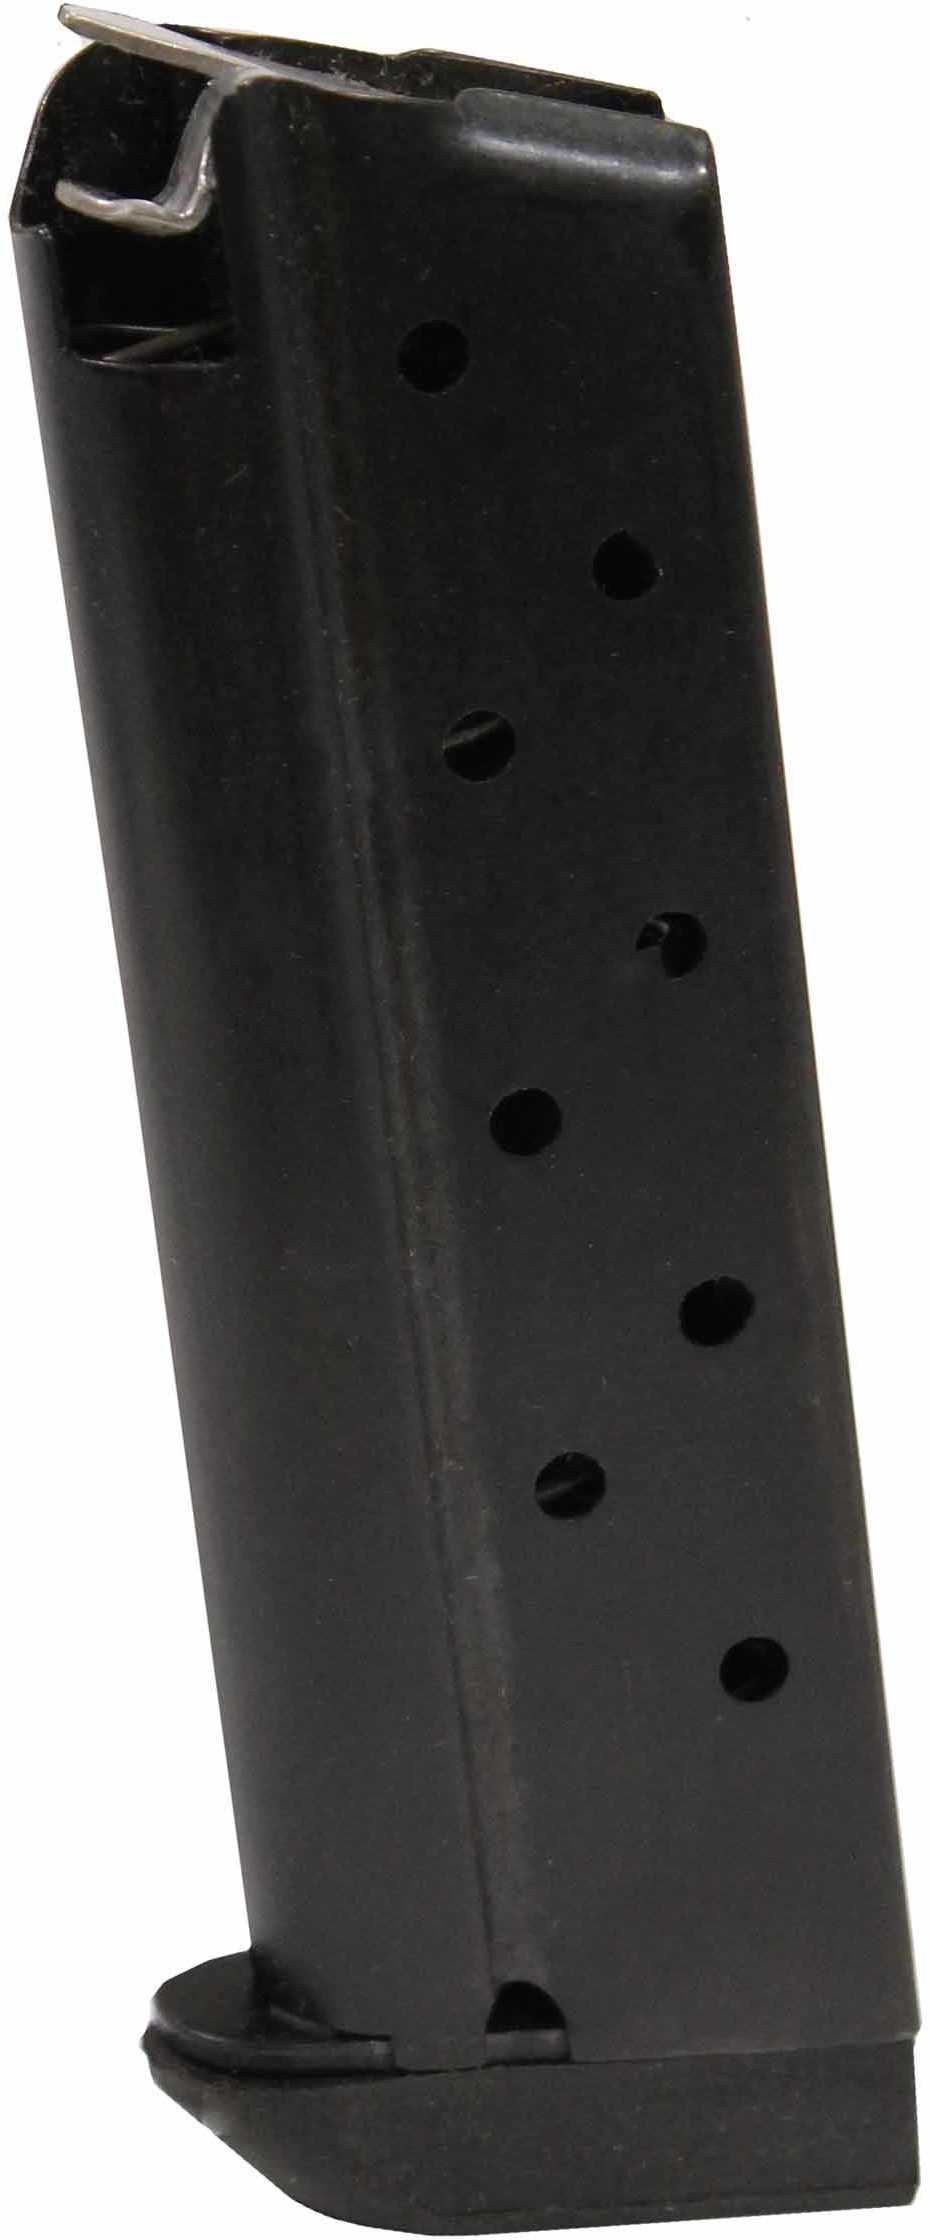 Rock Island Armory 1911 Compact 9mm 8-Round Capacty Magazine, Blued Md: 9S293B